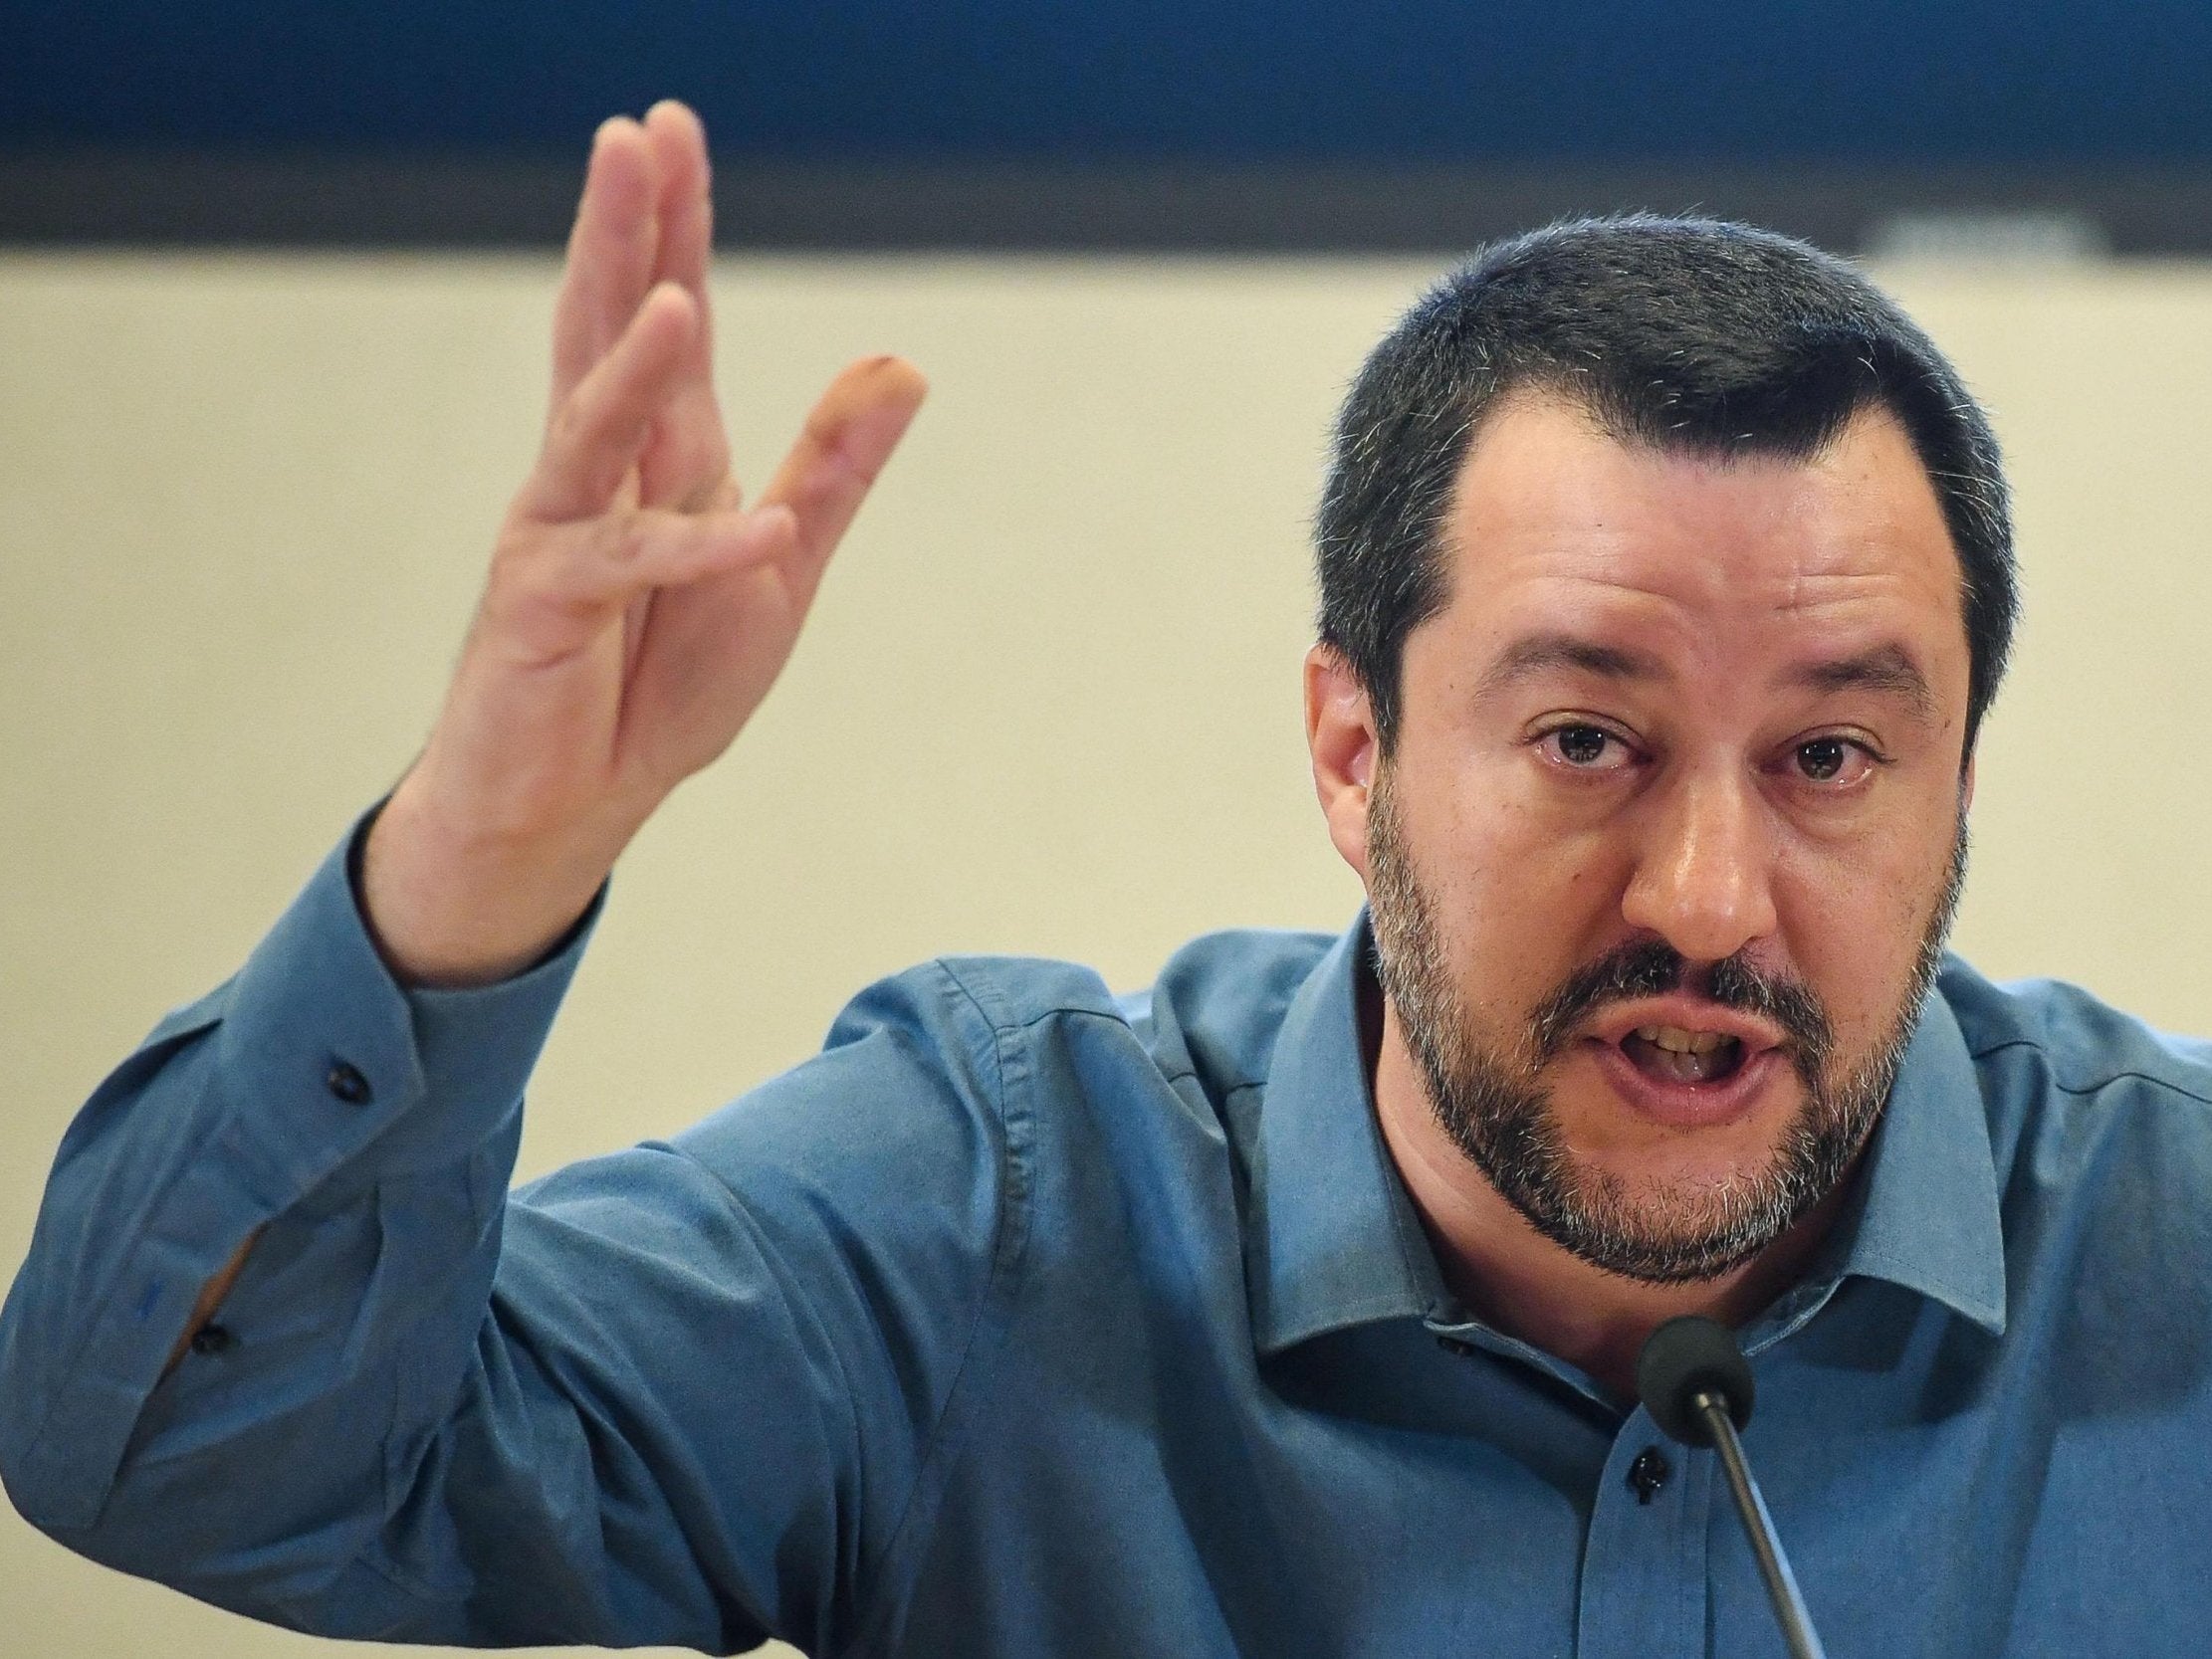 Matteo Salvini, Northern League party leader and interior minister